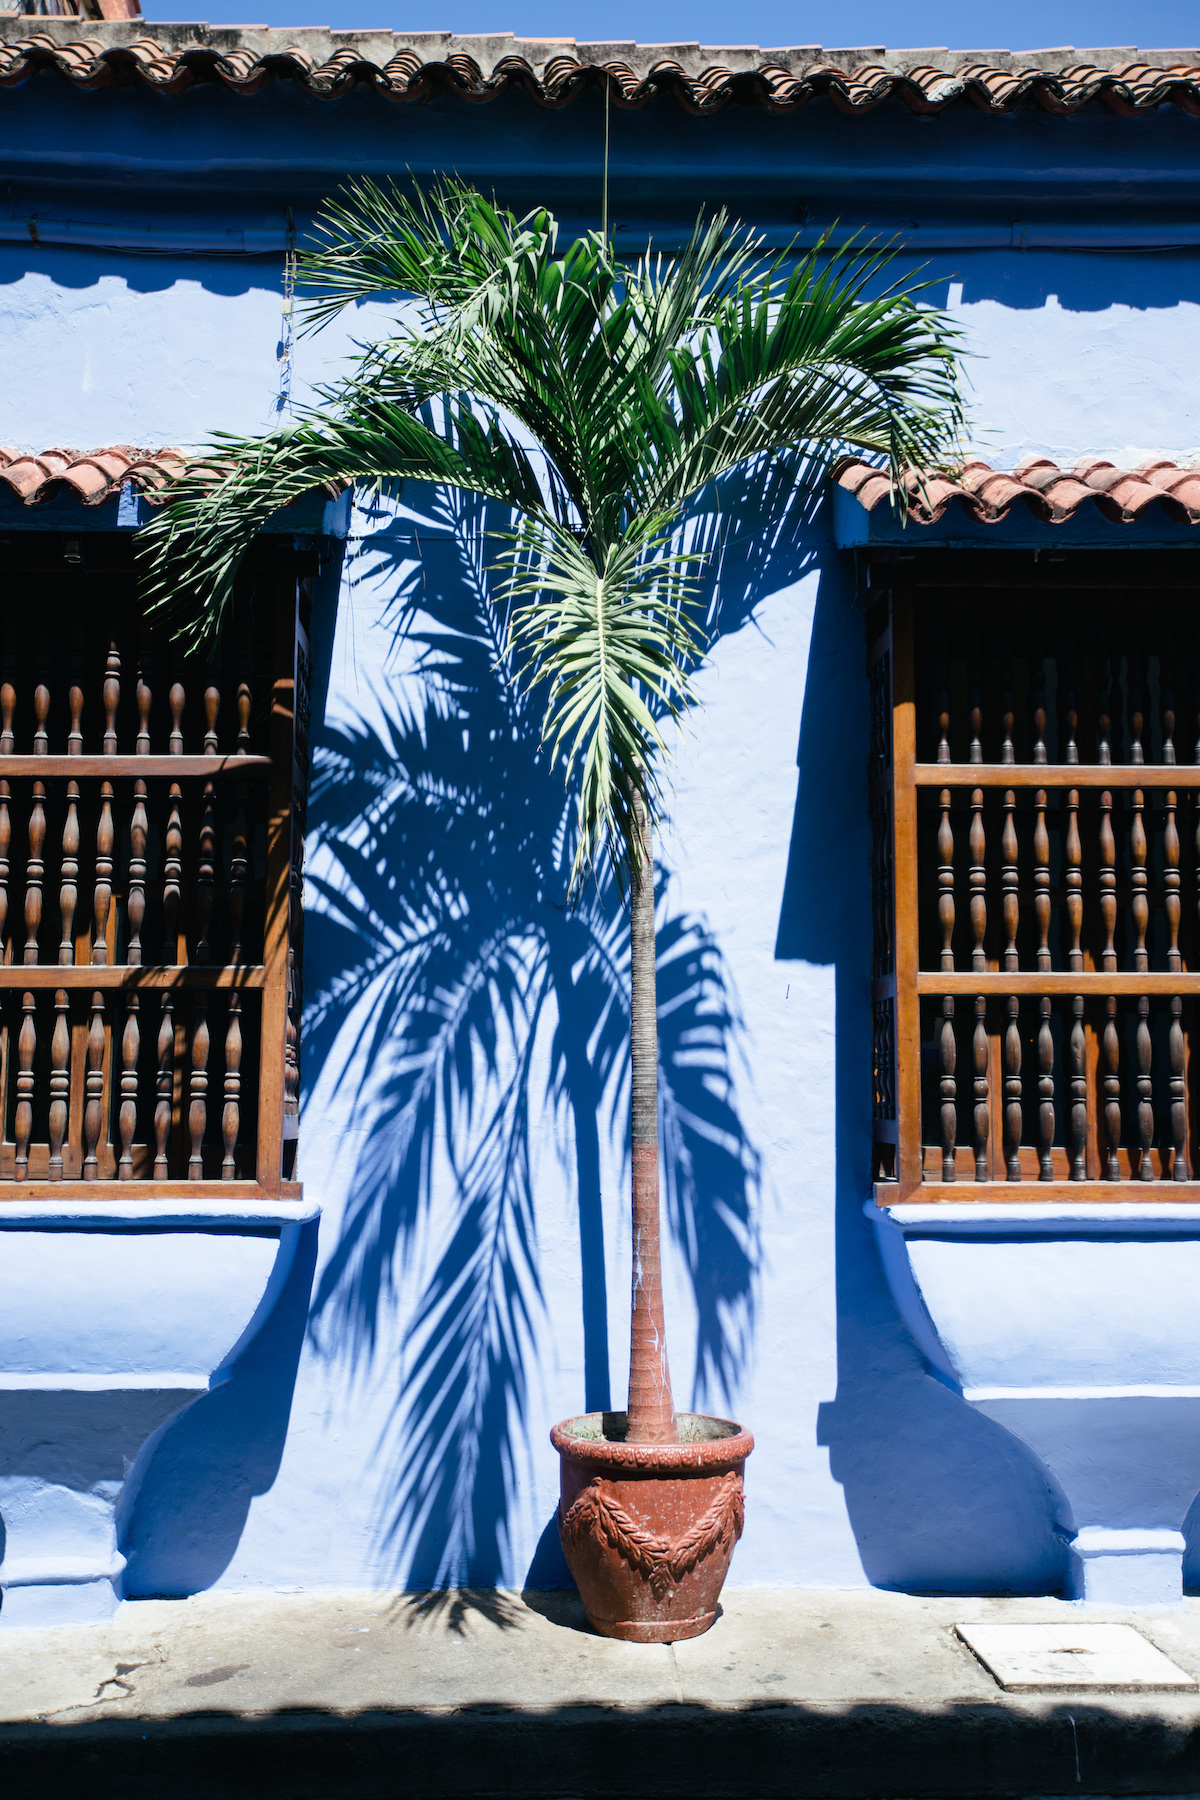  Cartagena is full of colourful Spanish colonial buildings, many with gorgeous bougainvillea dripping off balconies. 